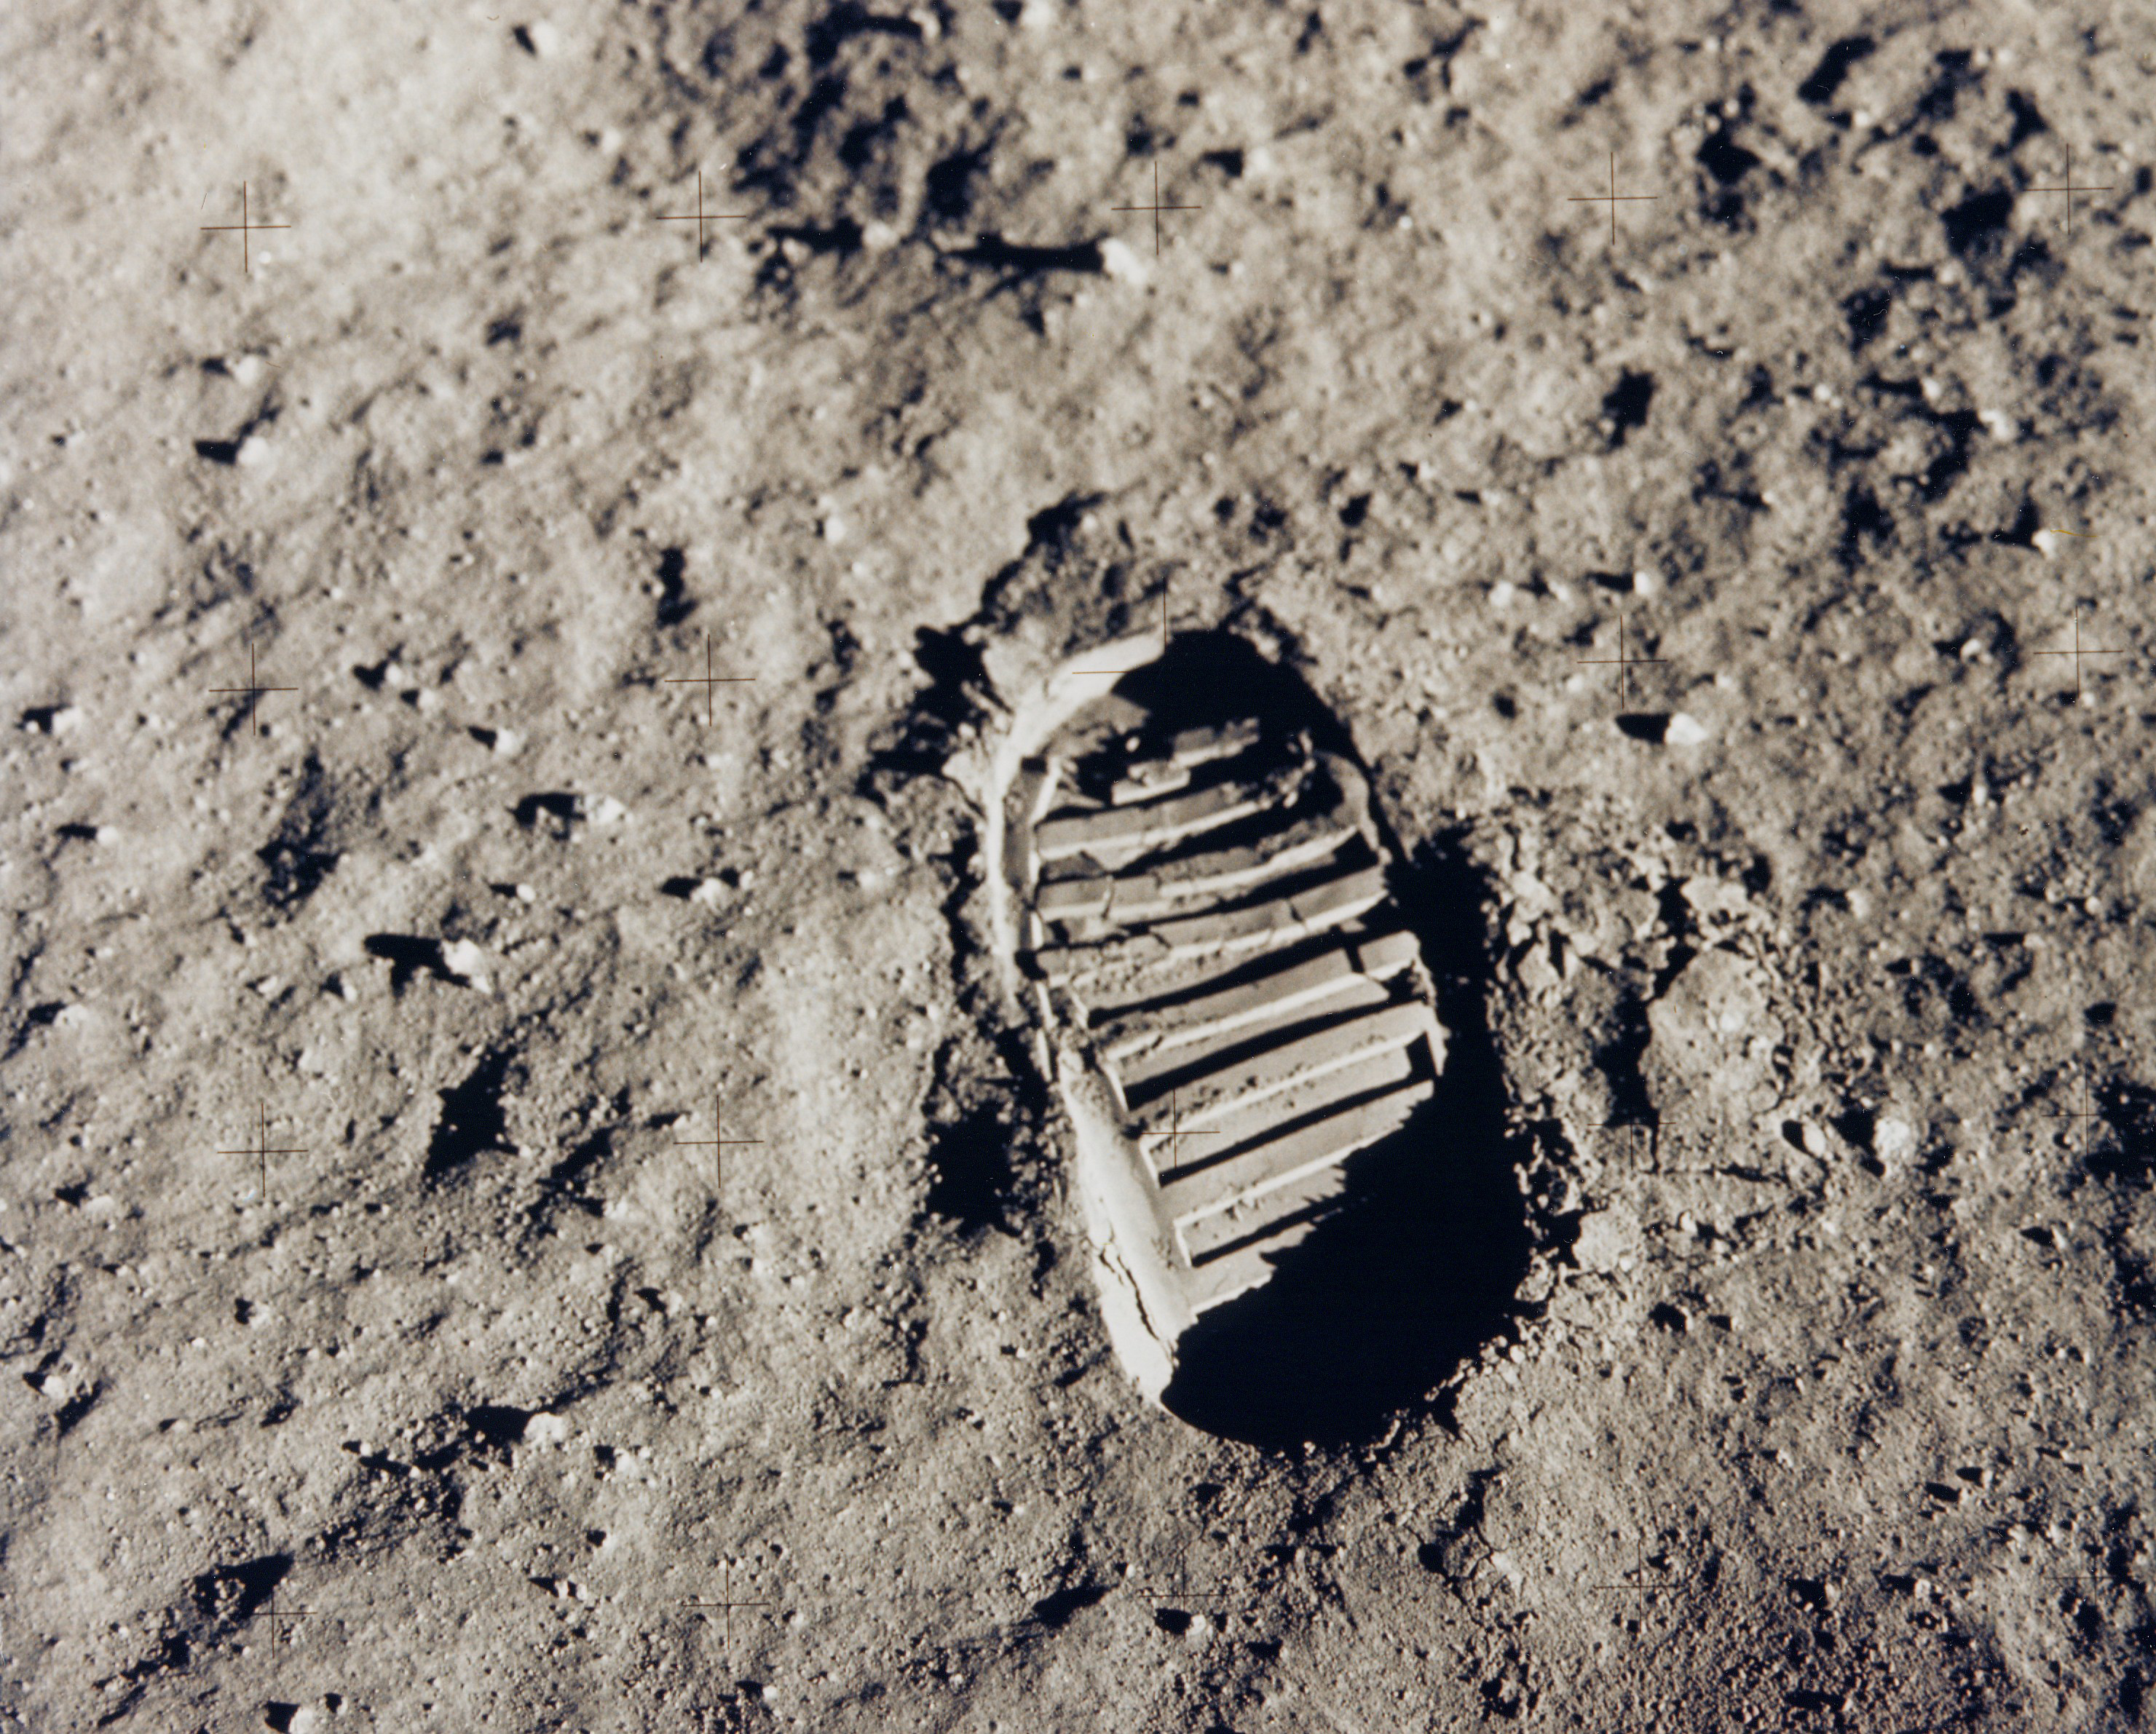 Imprint of astronaut boot in a thick layer of powdery, light grey dust.